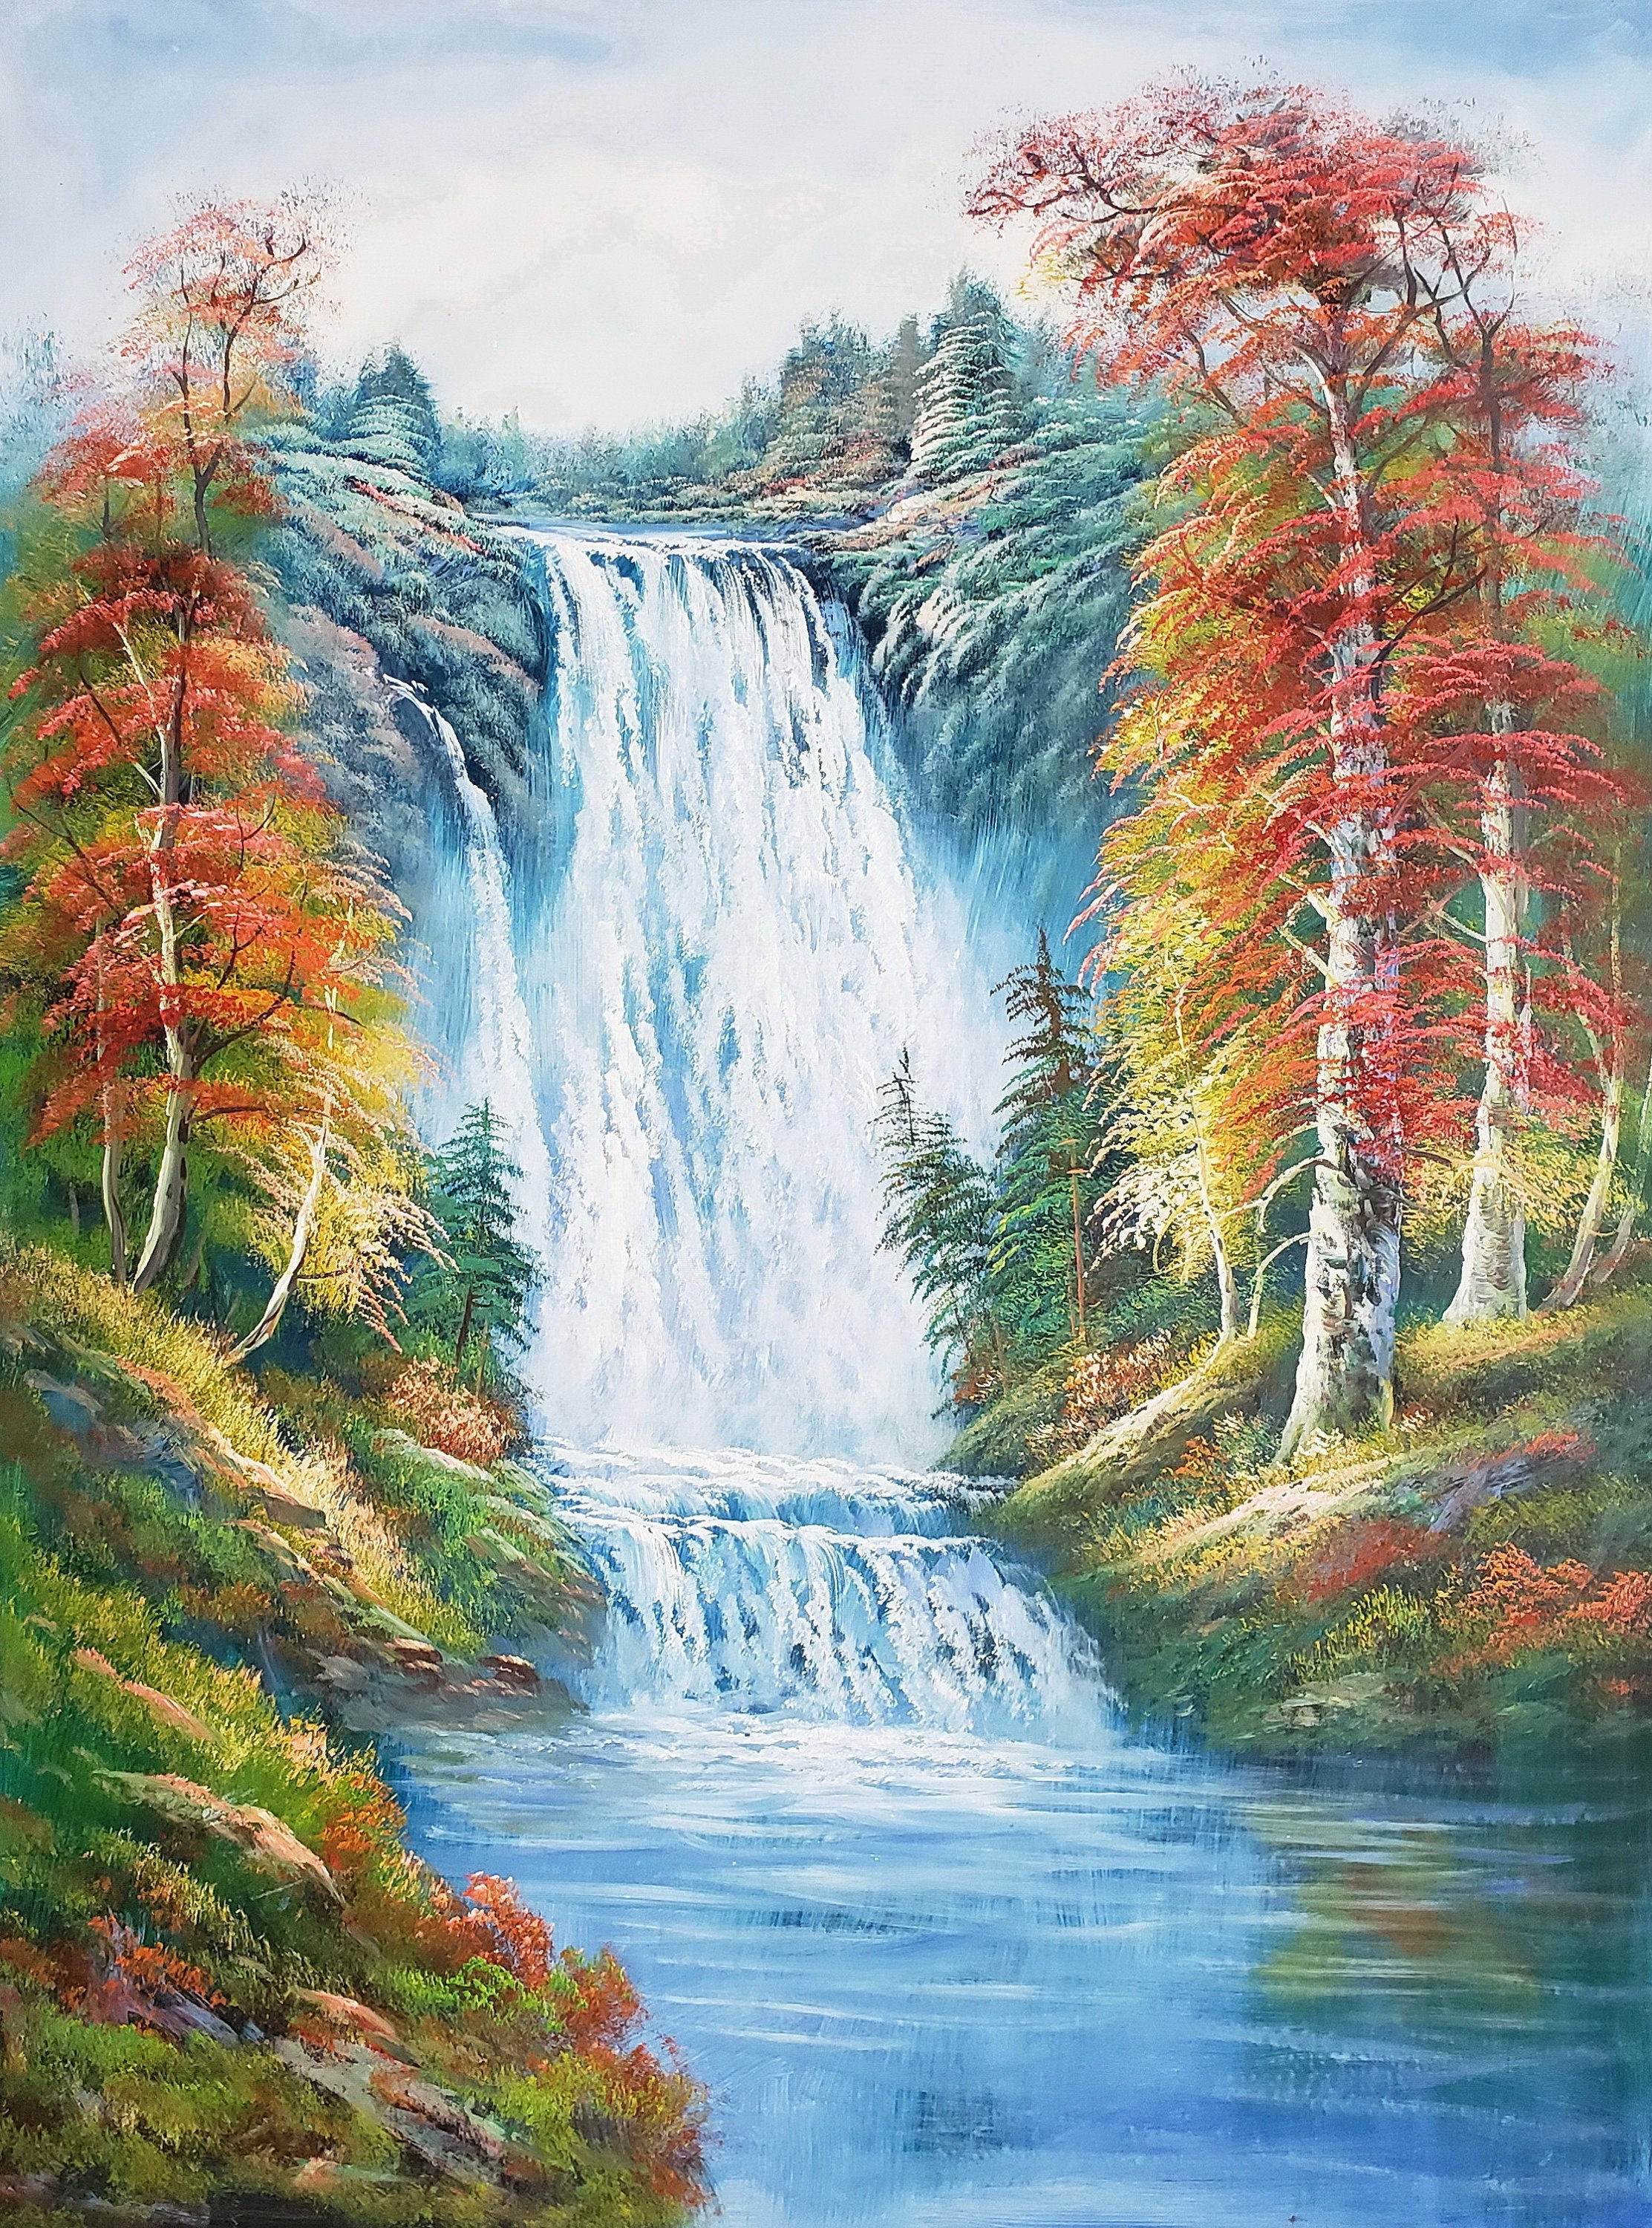 Nature Kids Painting by Numbers Waterfall Easy Child Design Wall